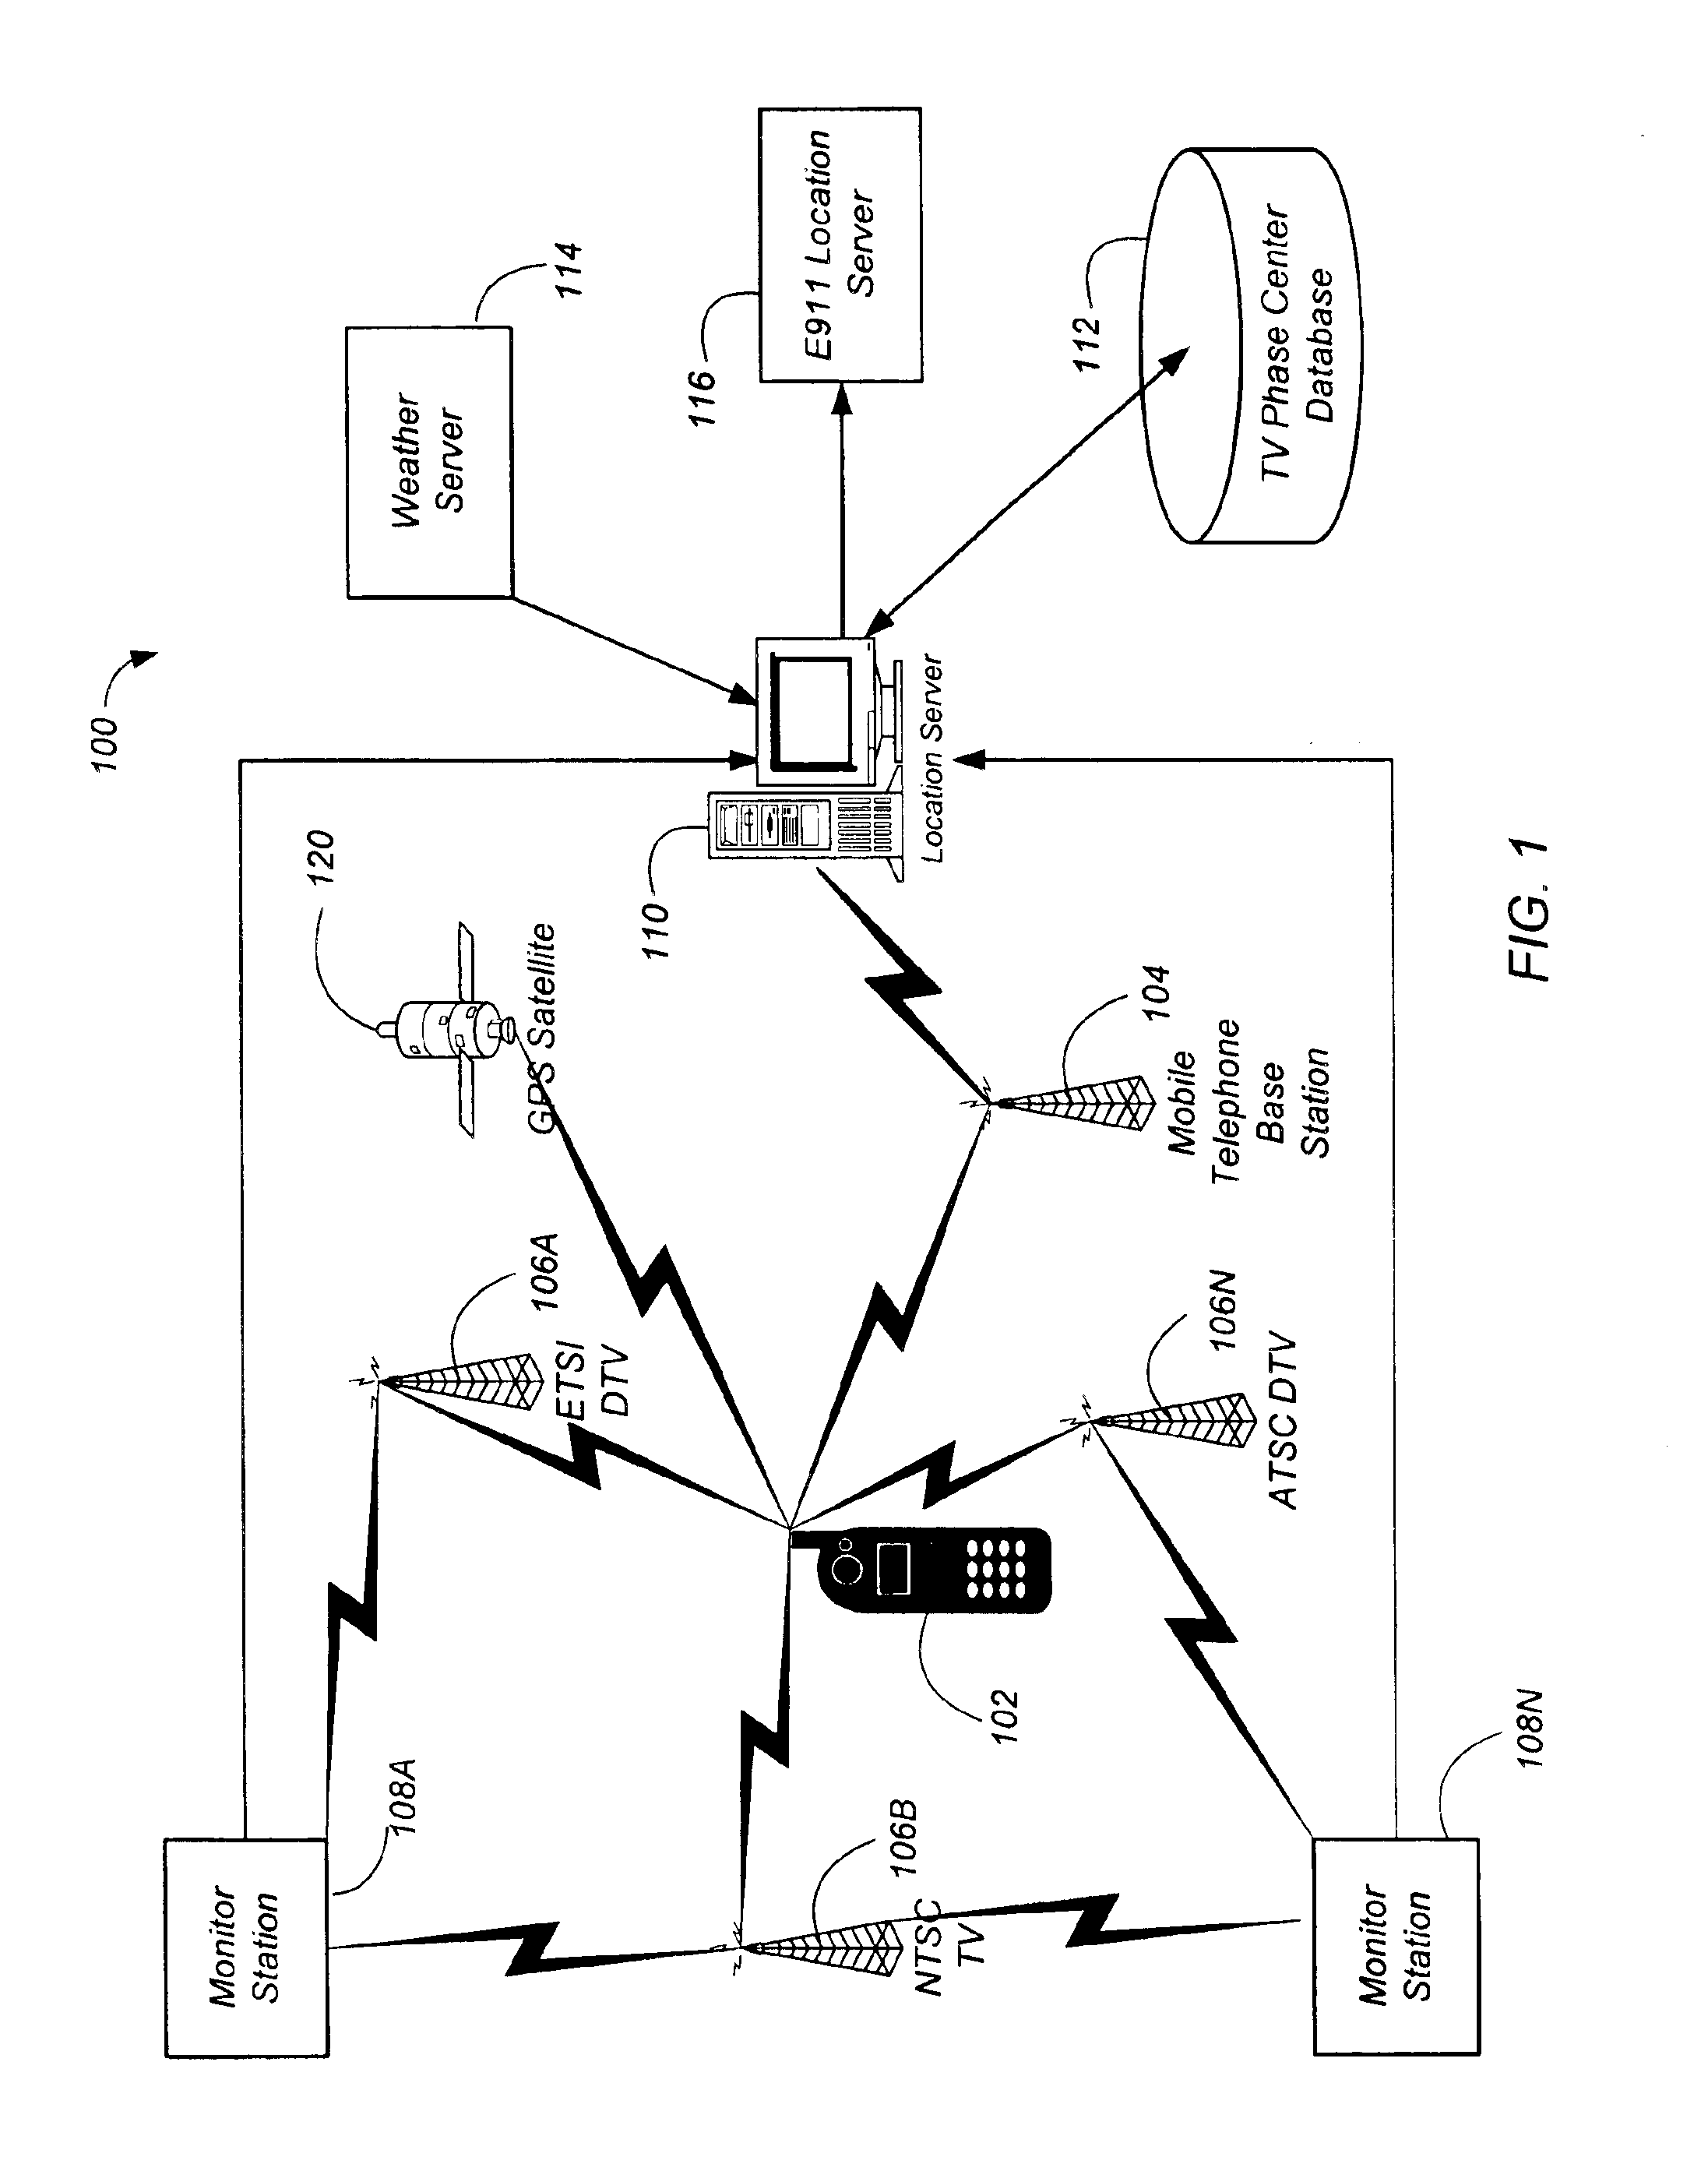 Position location using broadcast television signals and mobile telephone signals